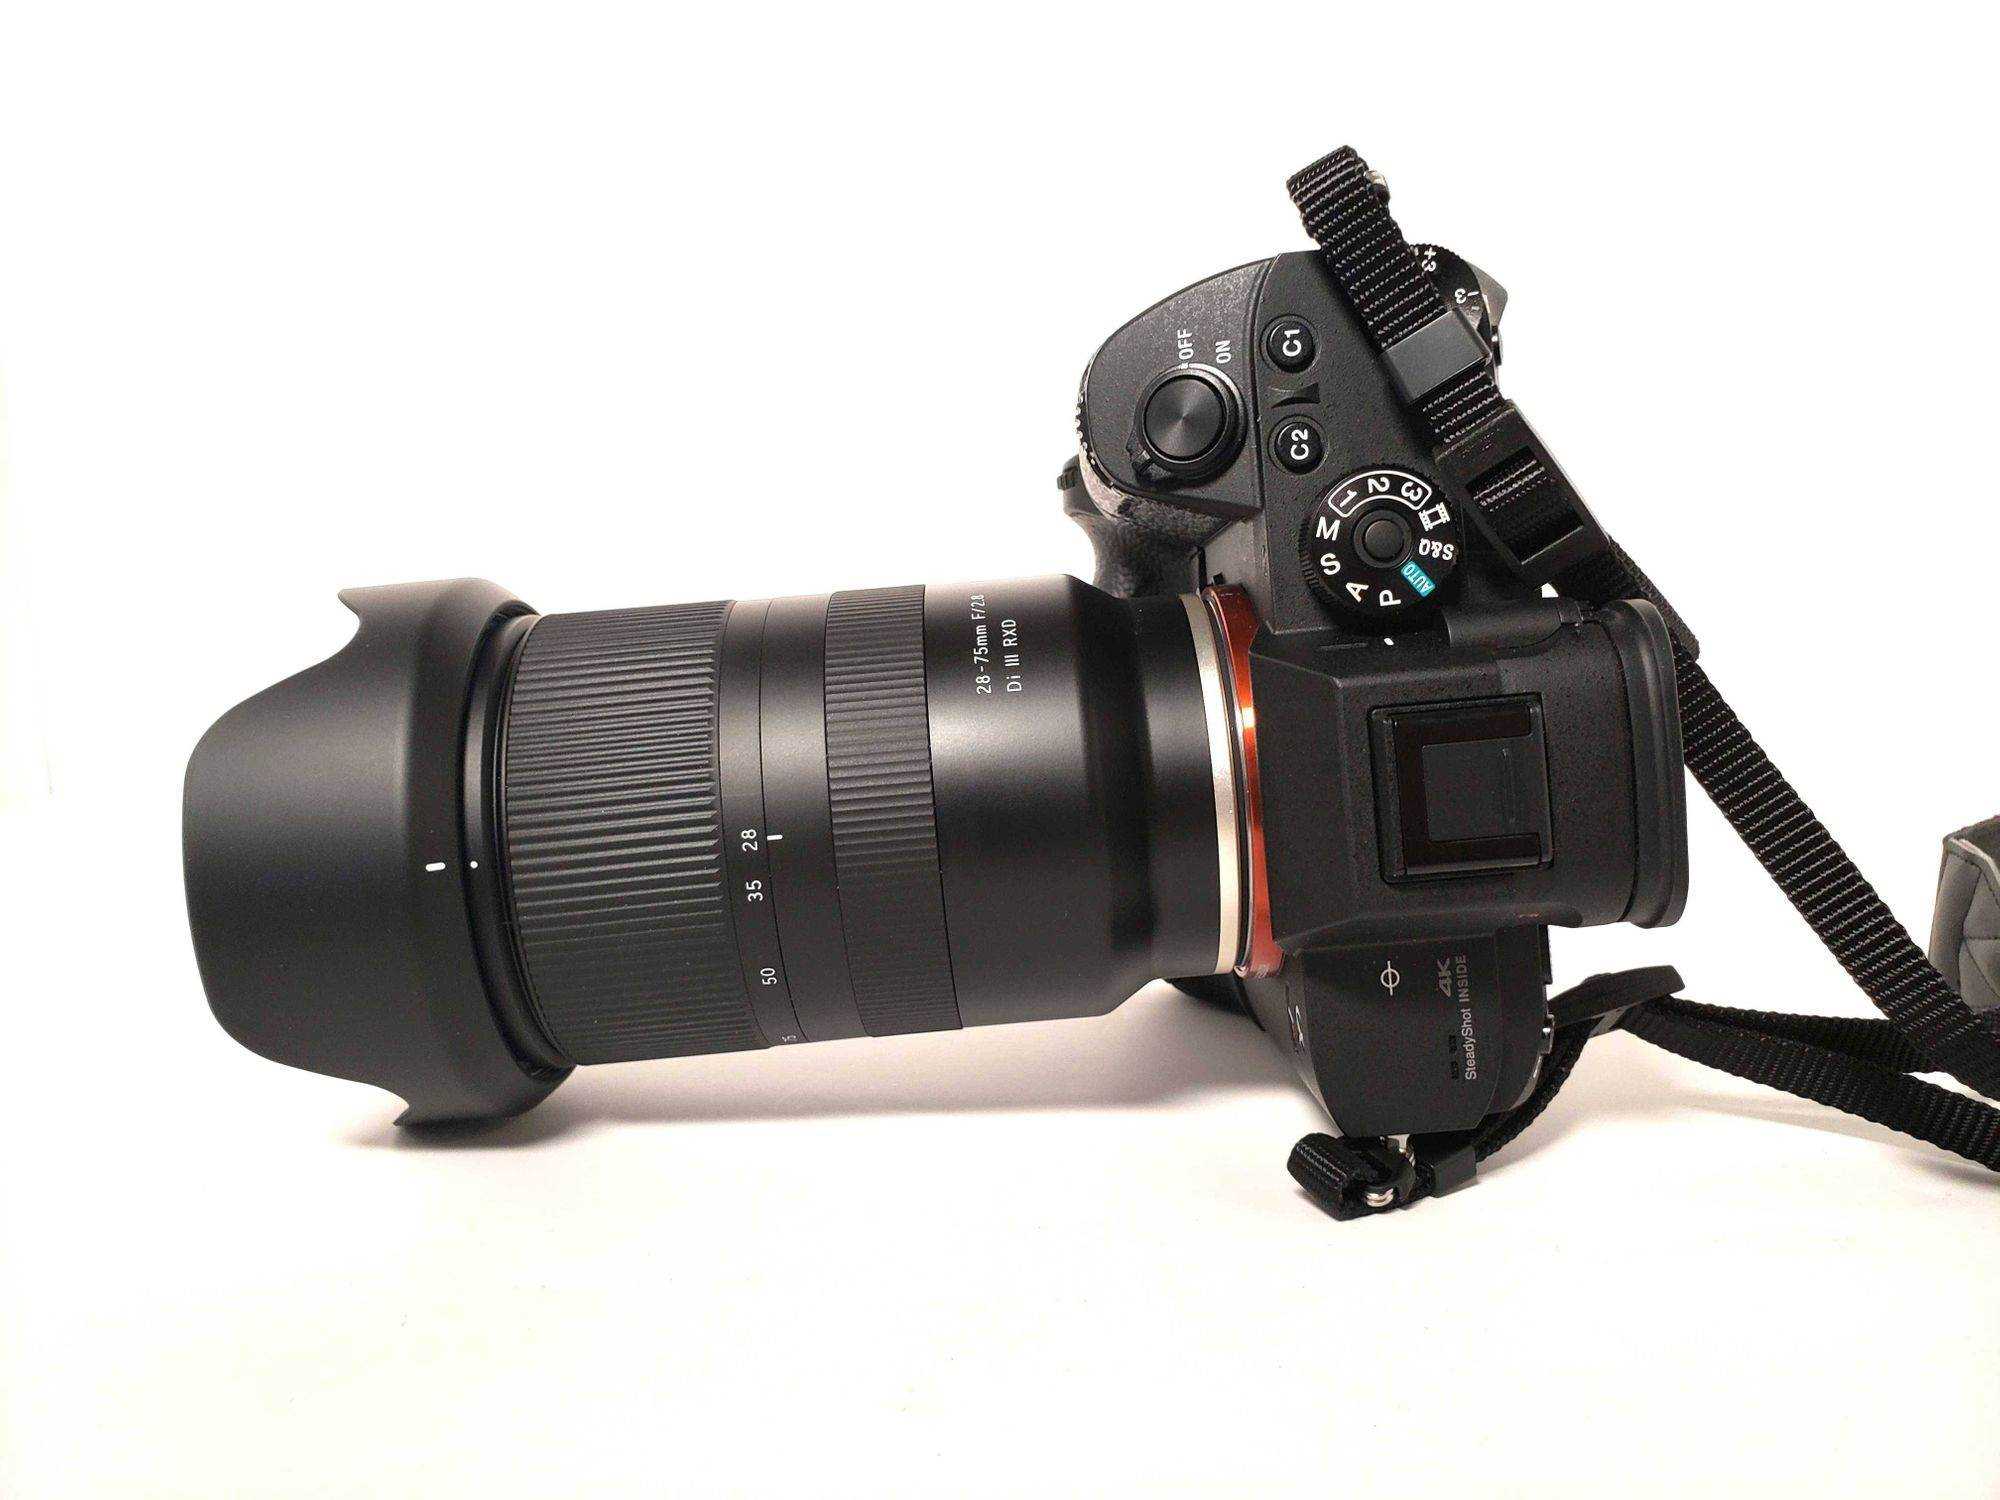 Review: Tamron 28-75mm f/2.8 Di III RXD Lens for Sony FE